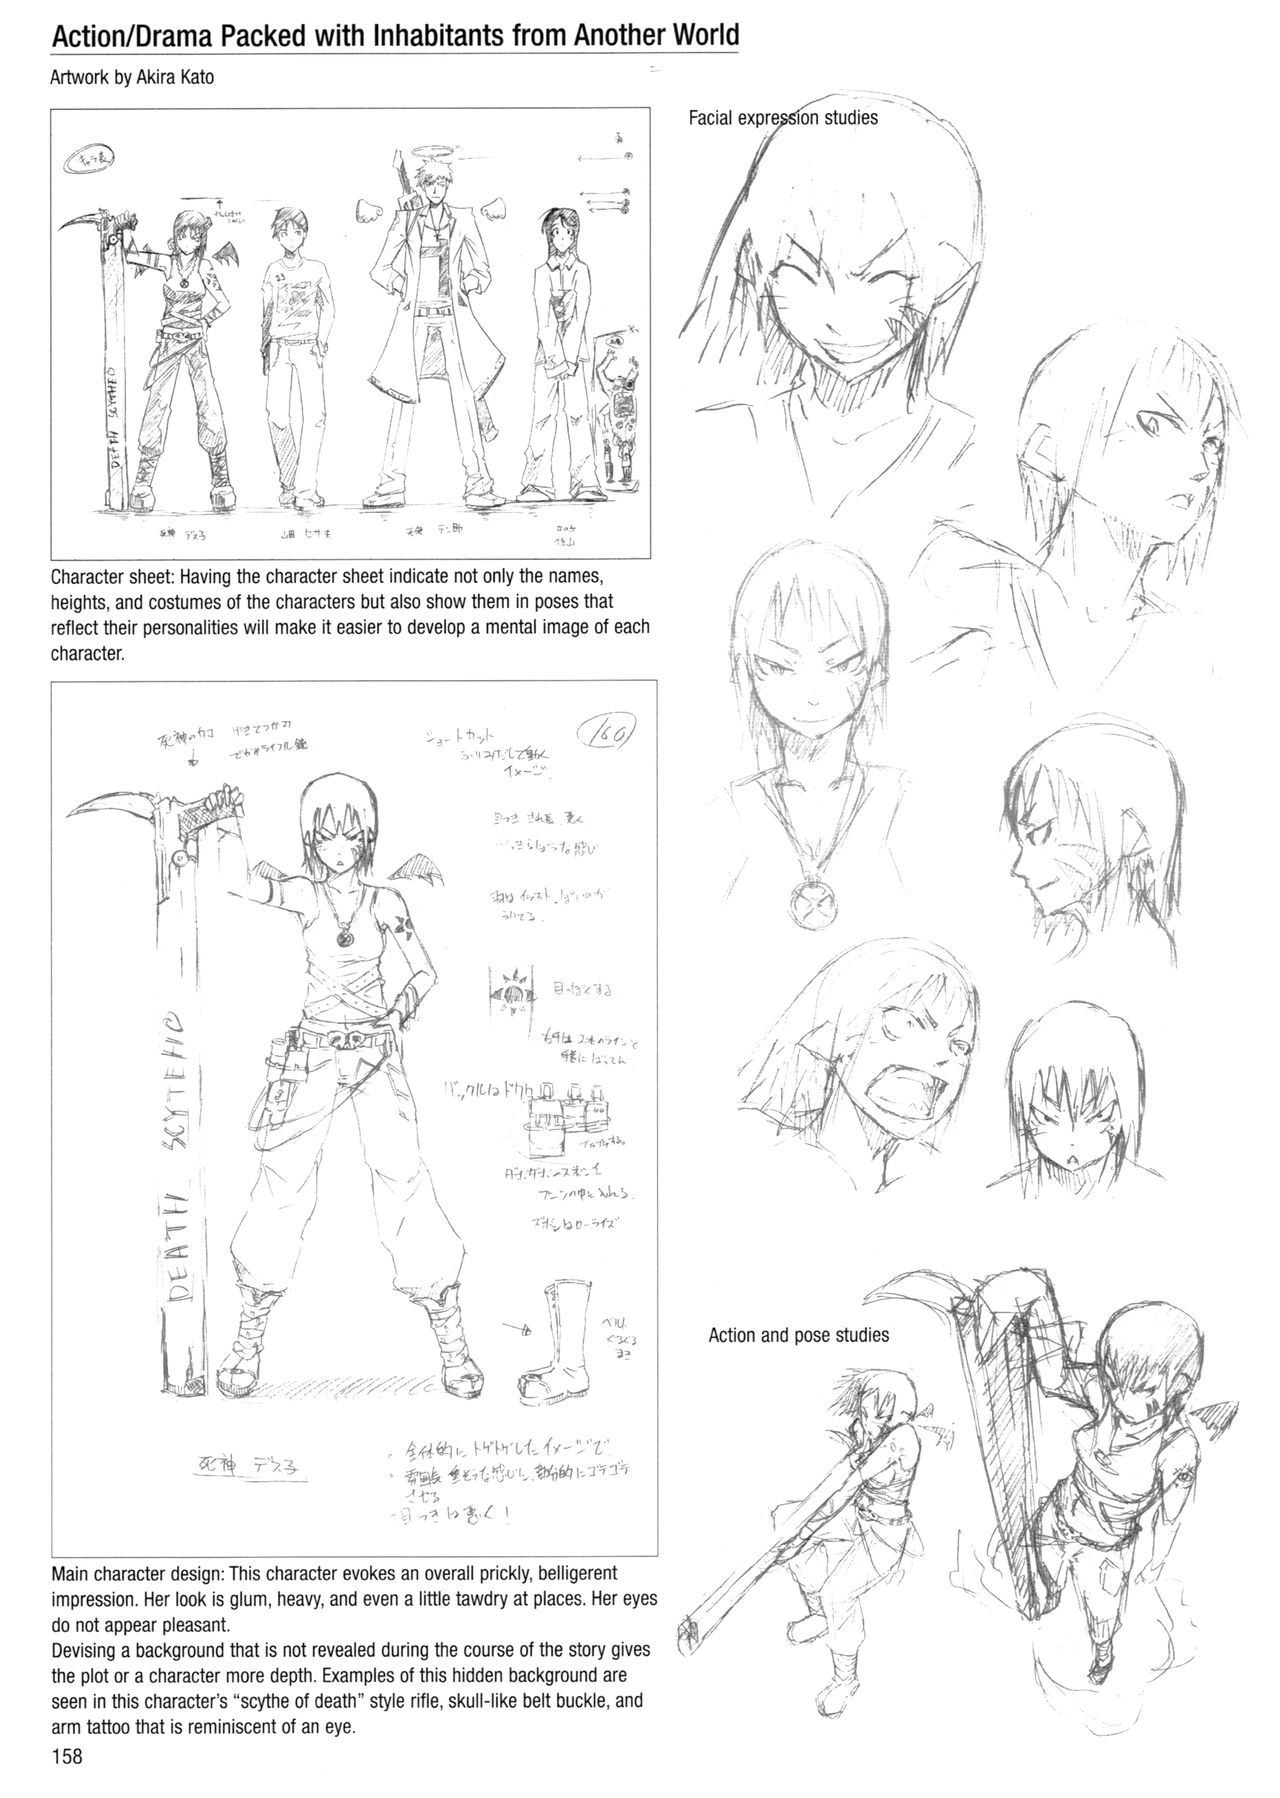 Sketching Manga-Style Vol. 3 - Unforgettable Characters 157